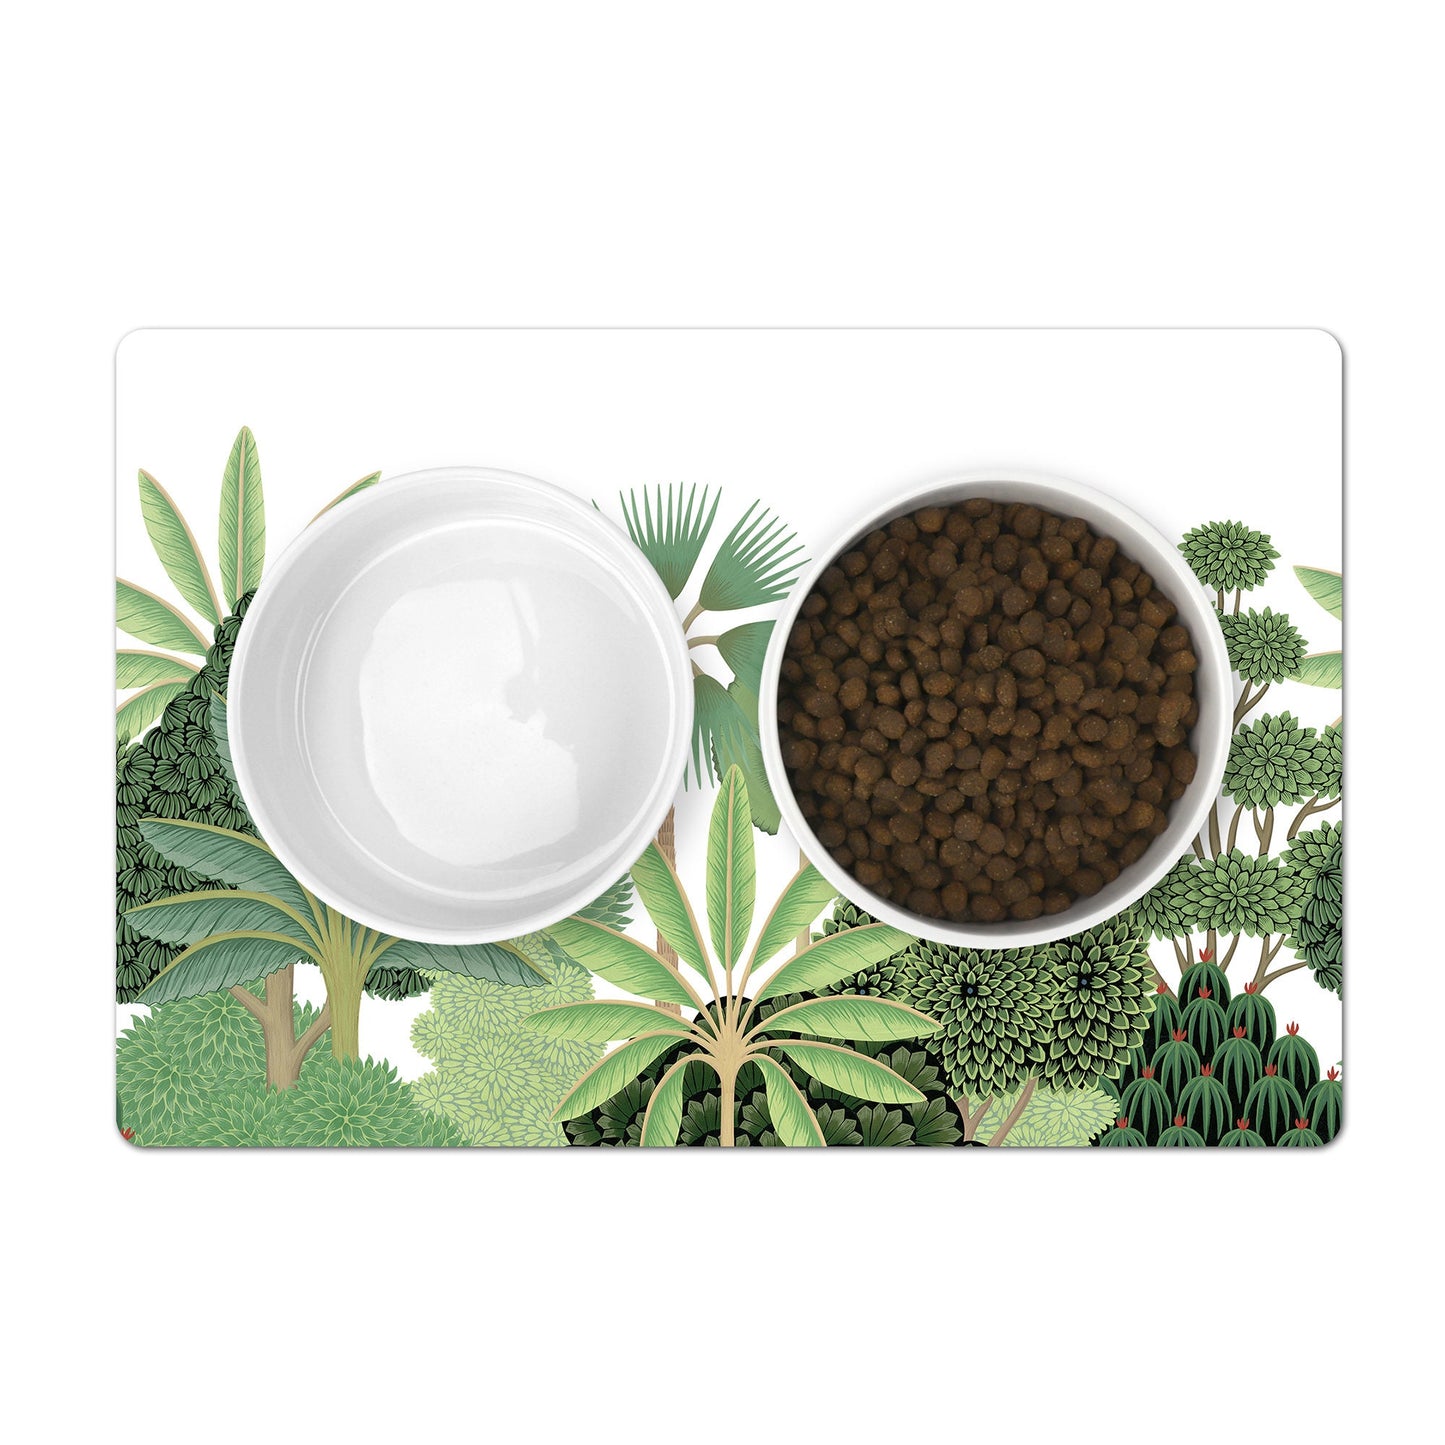 Pet food mat with tropical palm tree print for cat and dog food bowls.